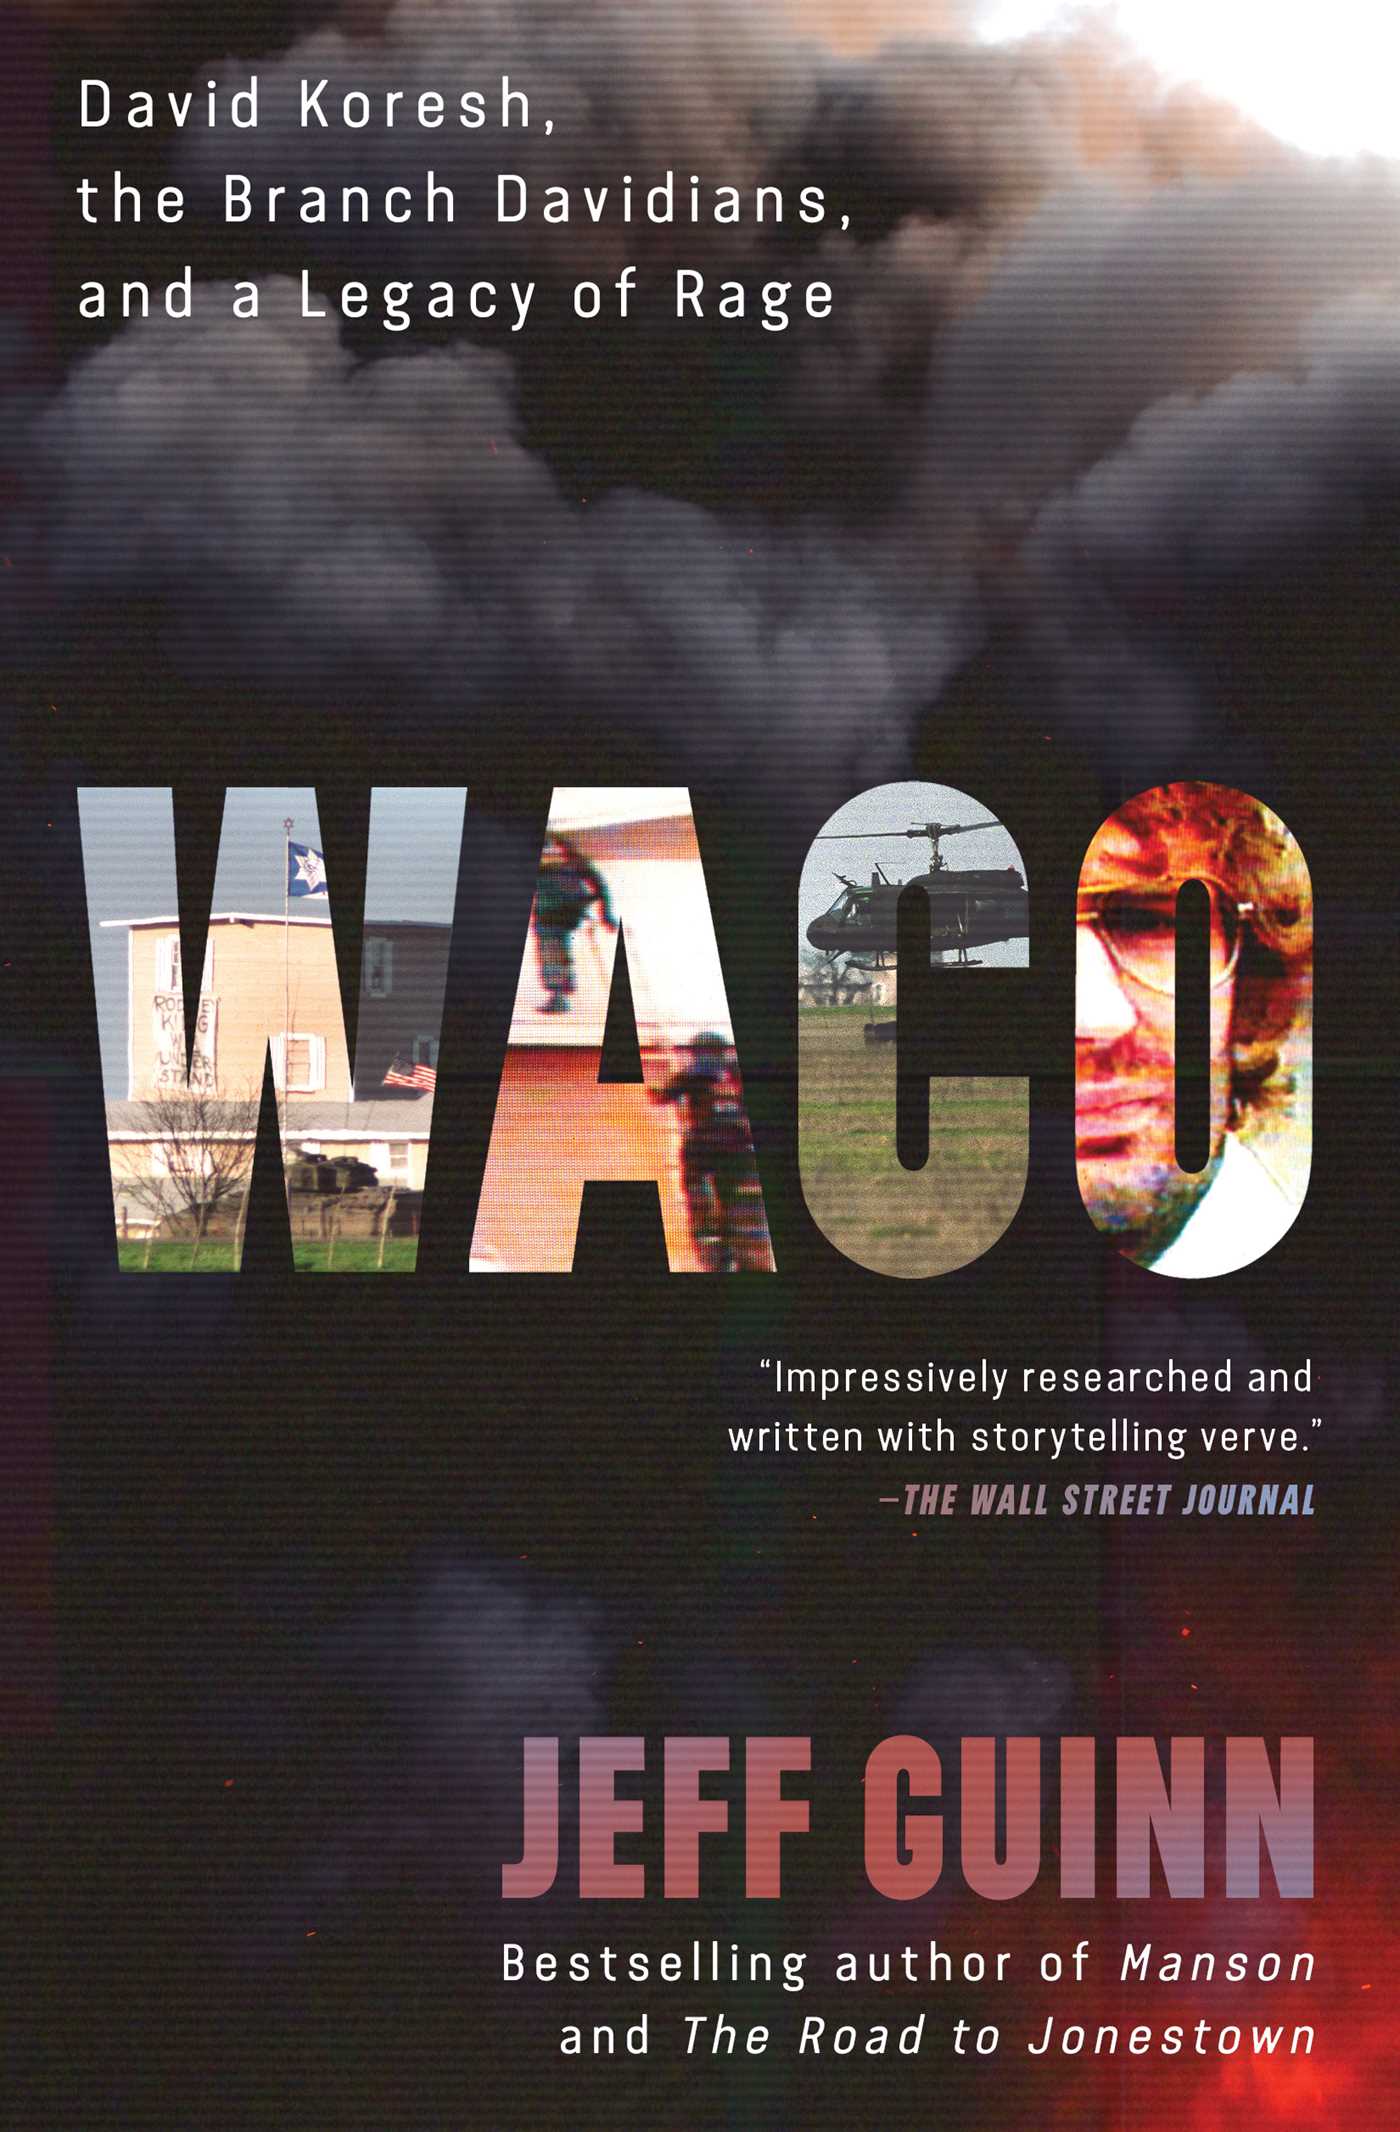 Waco David Koresh, the Branch Davidians, and A Legacy of Rage cover image